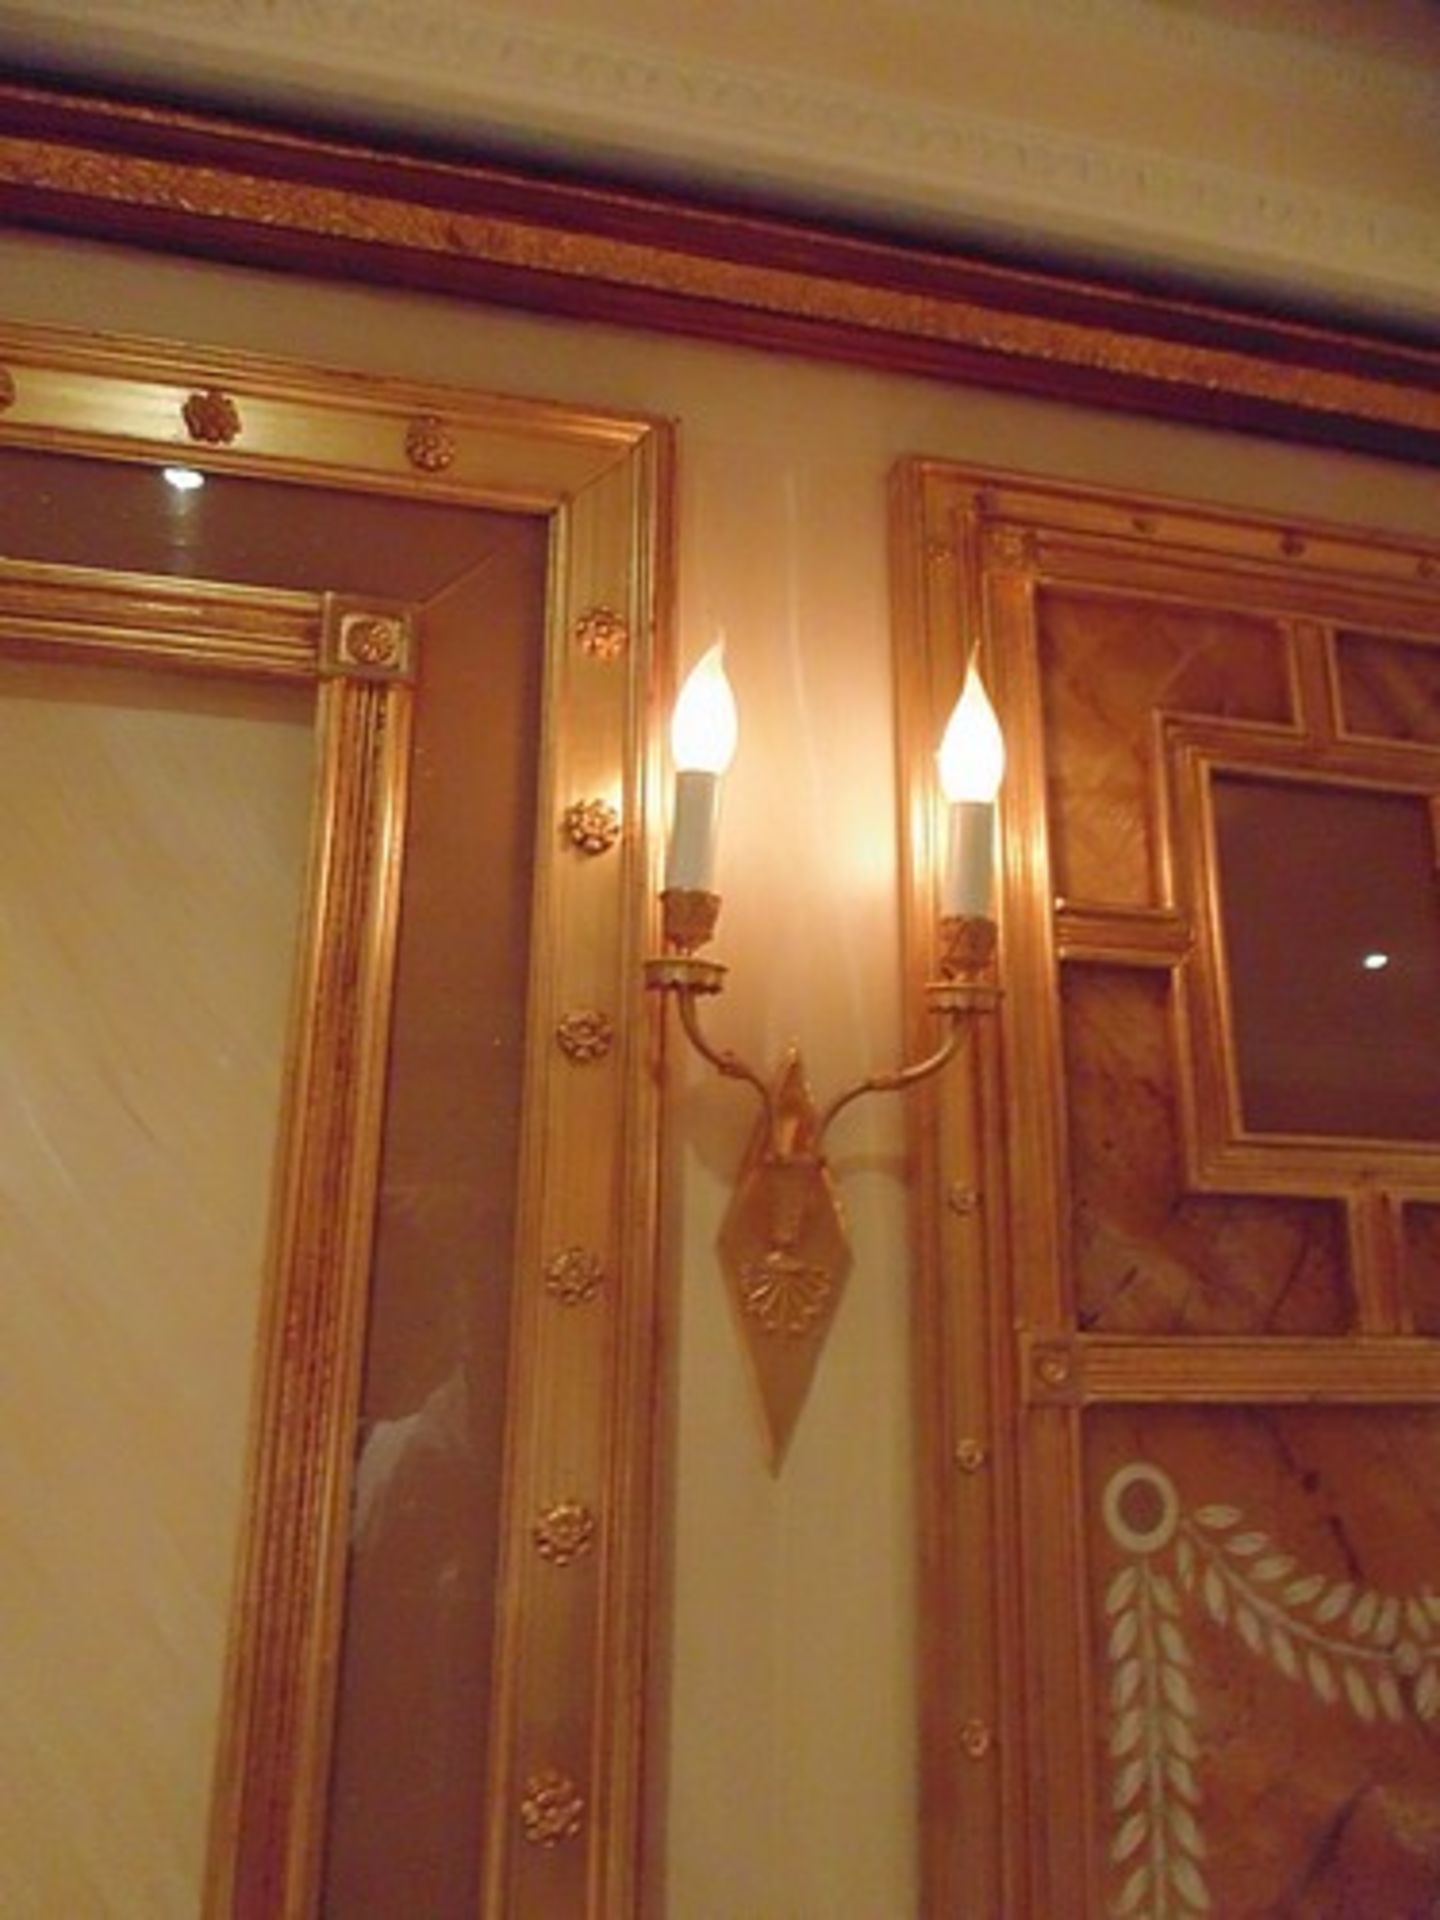 Laudarte SRL. 4 x twin arm candle wall sconces 24ct. gold on bronze